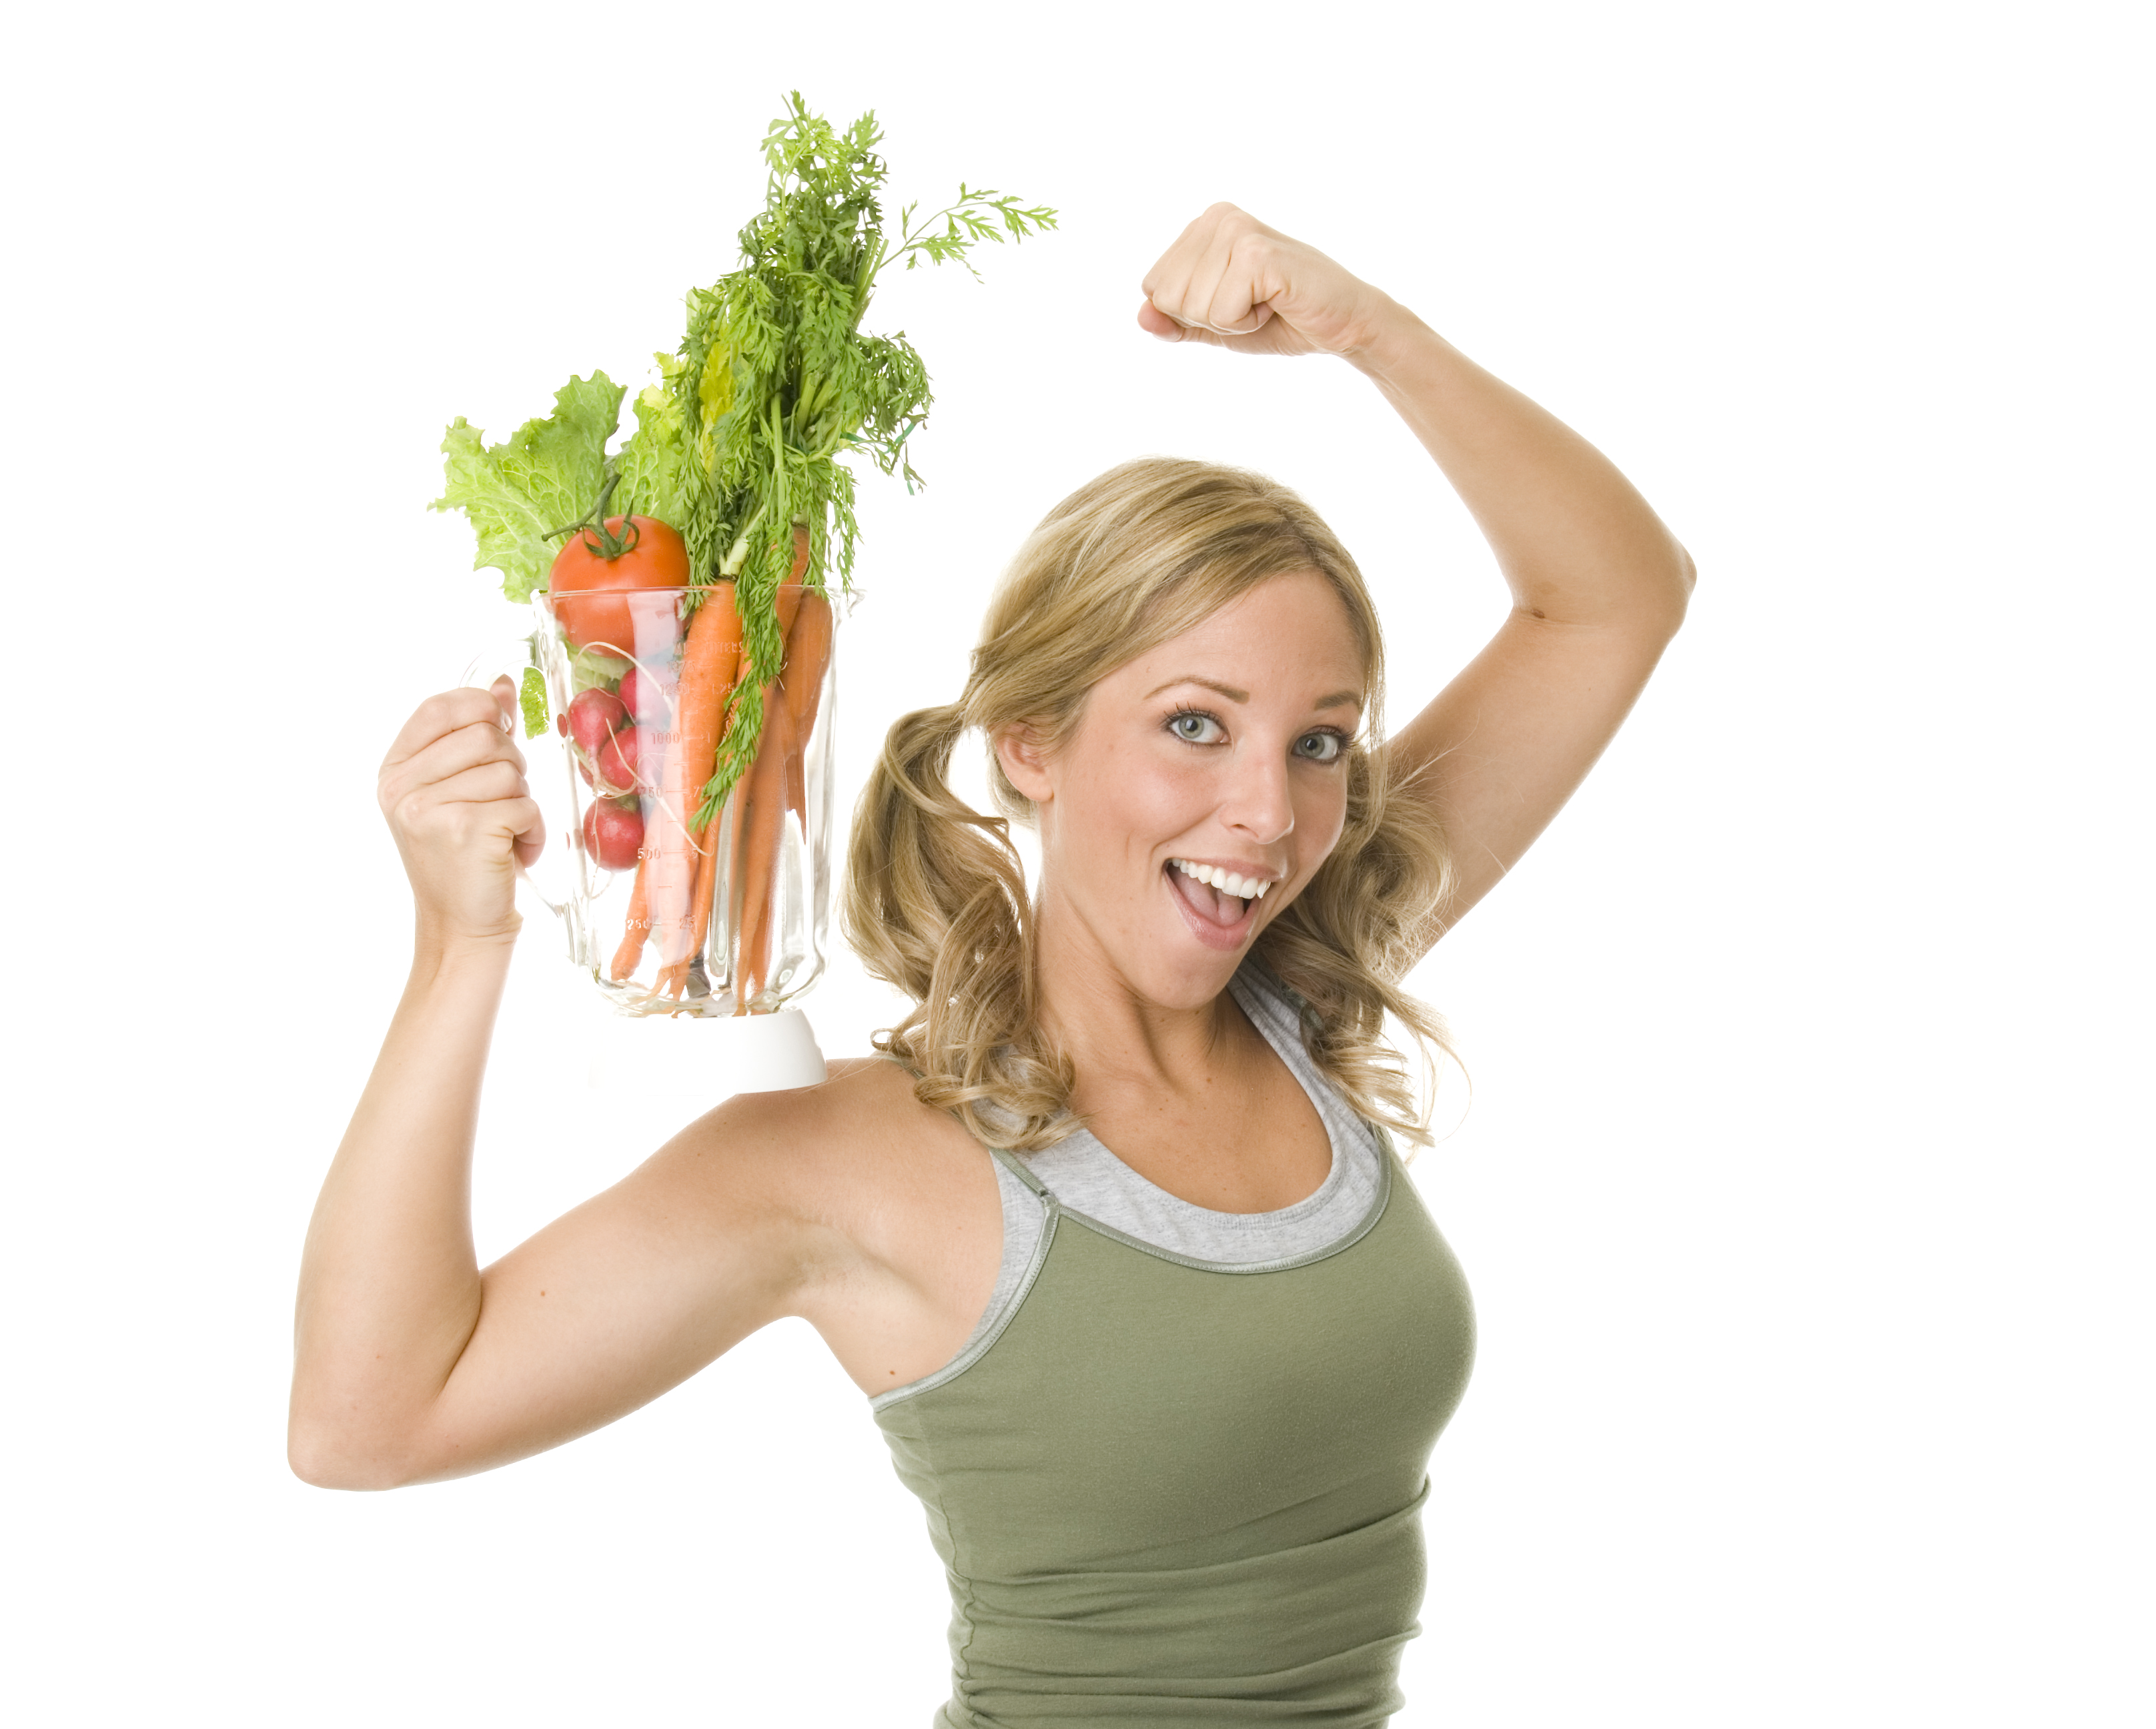 "A young, fit woman holds a blender full of vegetables while flexing her other arm."